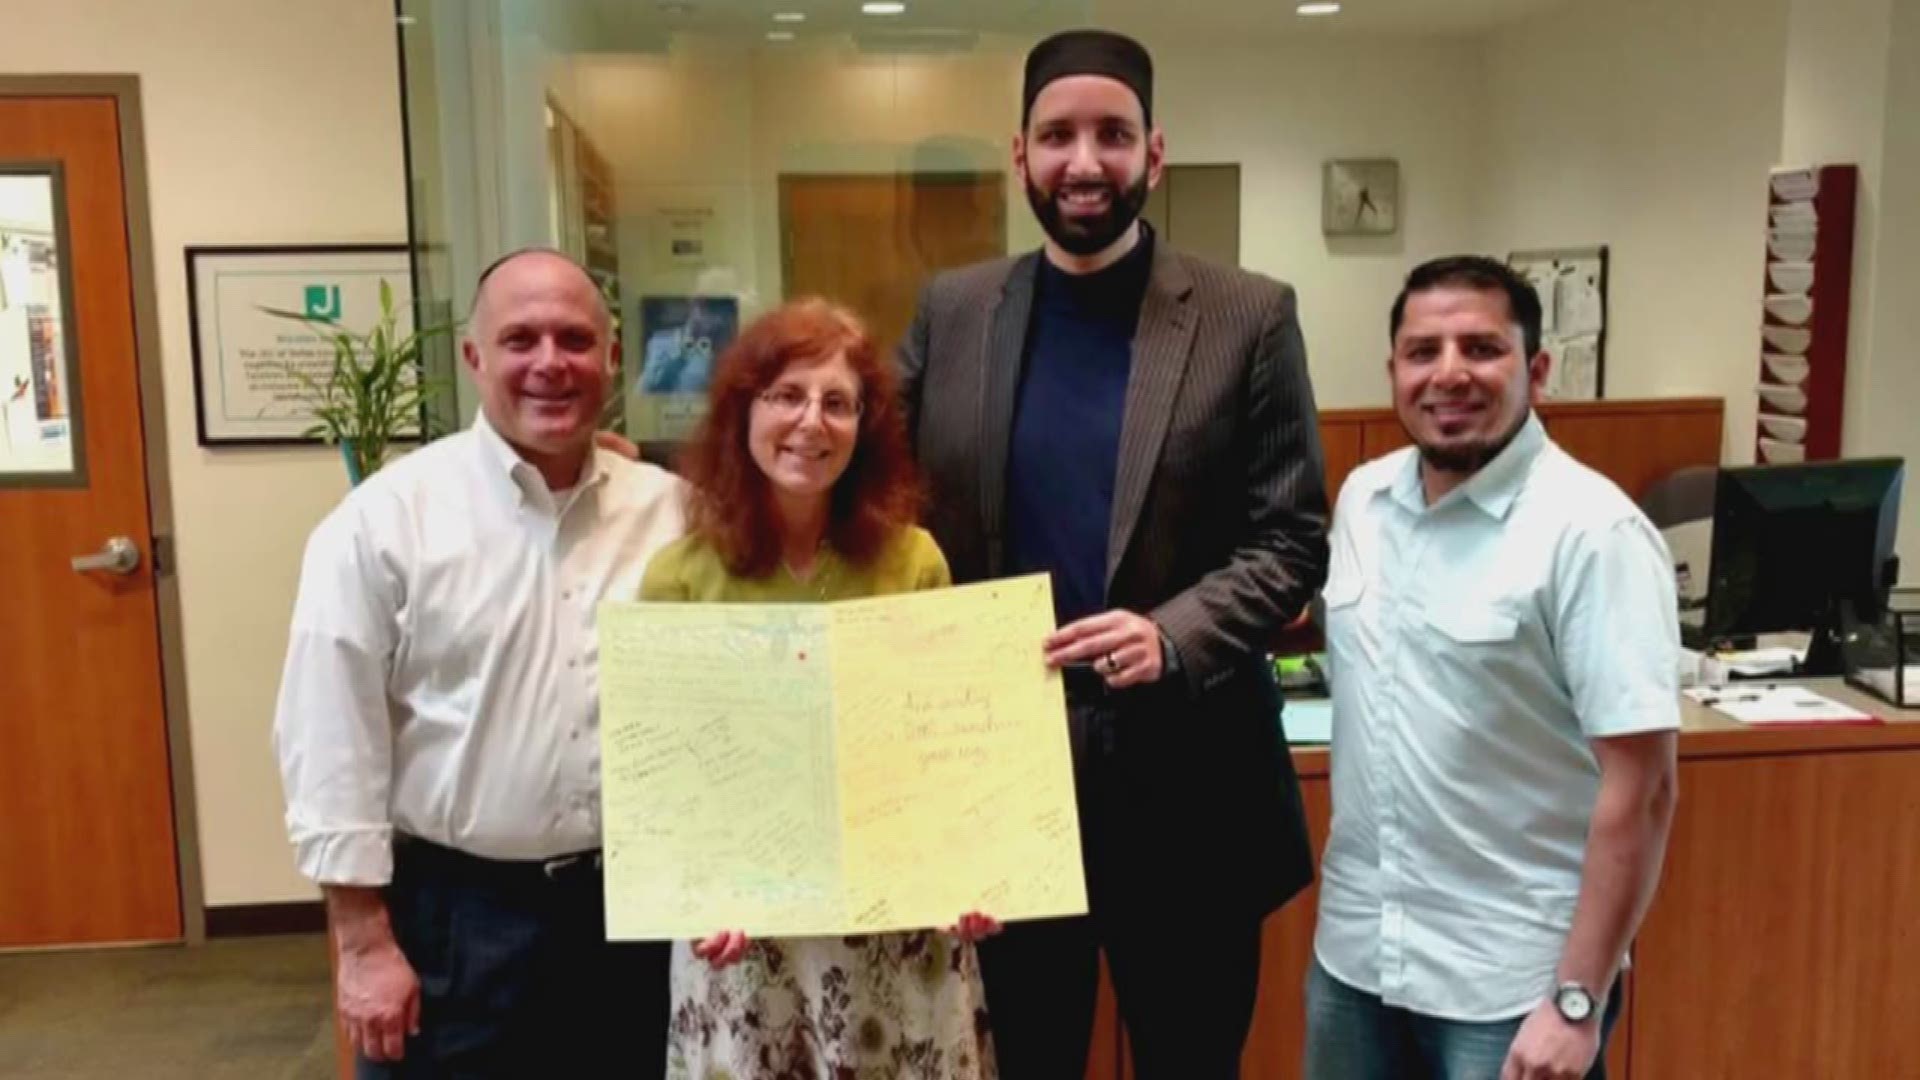 North Texas Muslims offer support to Jewish community amid threats